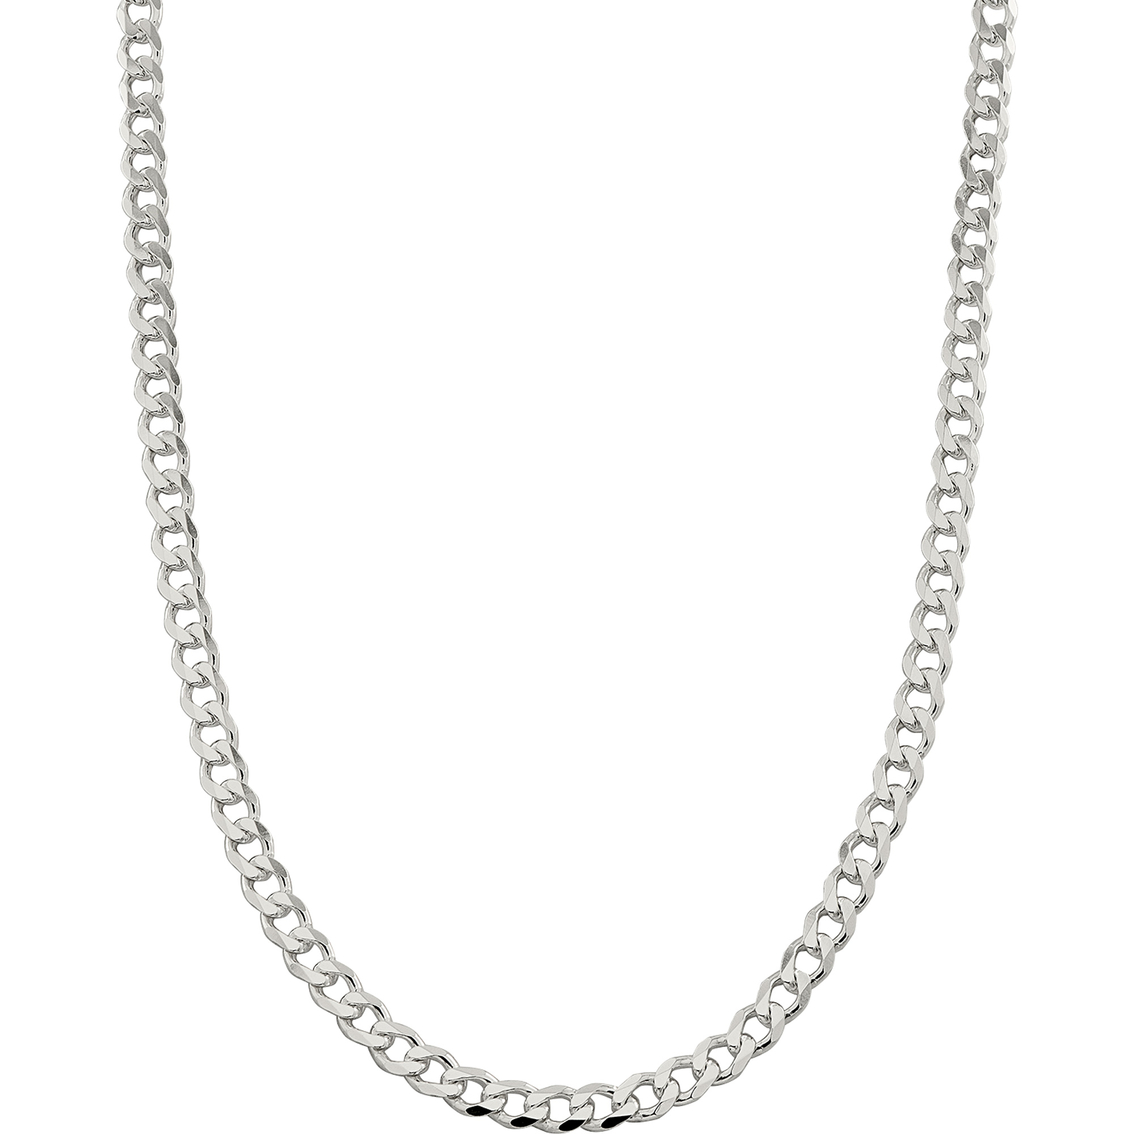 Sterling Silver 7.5mm Curb Chain Bracelet - Image 2 of 2